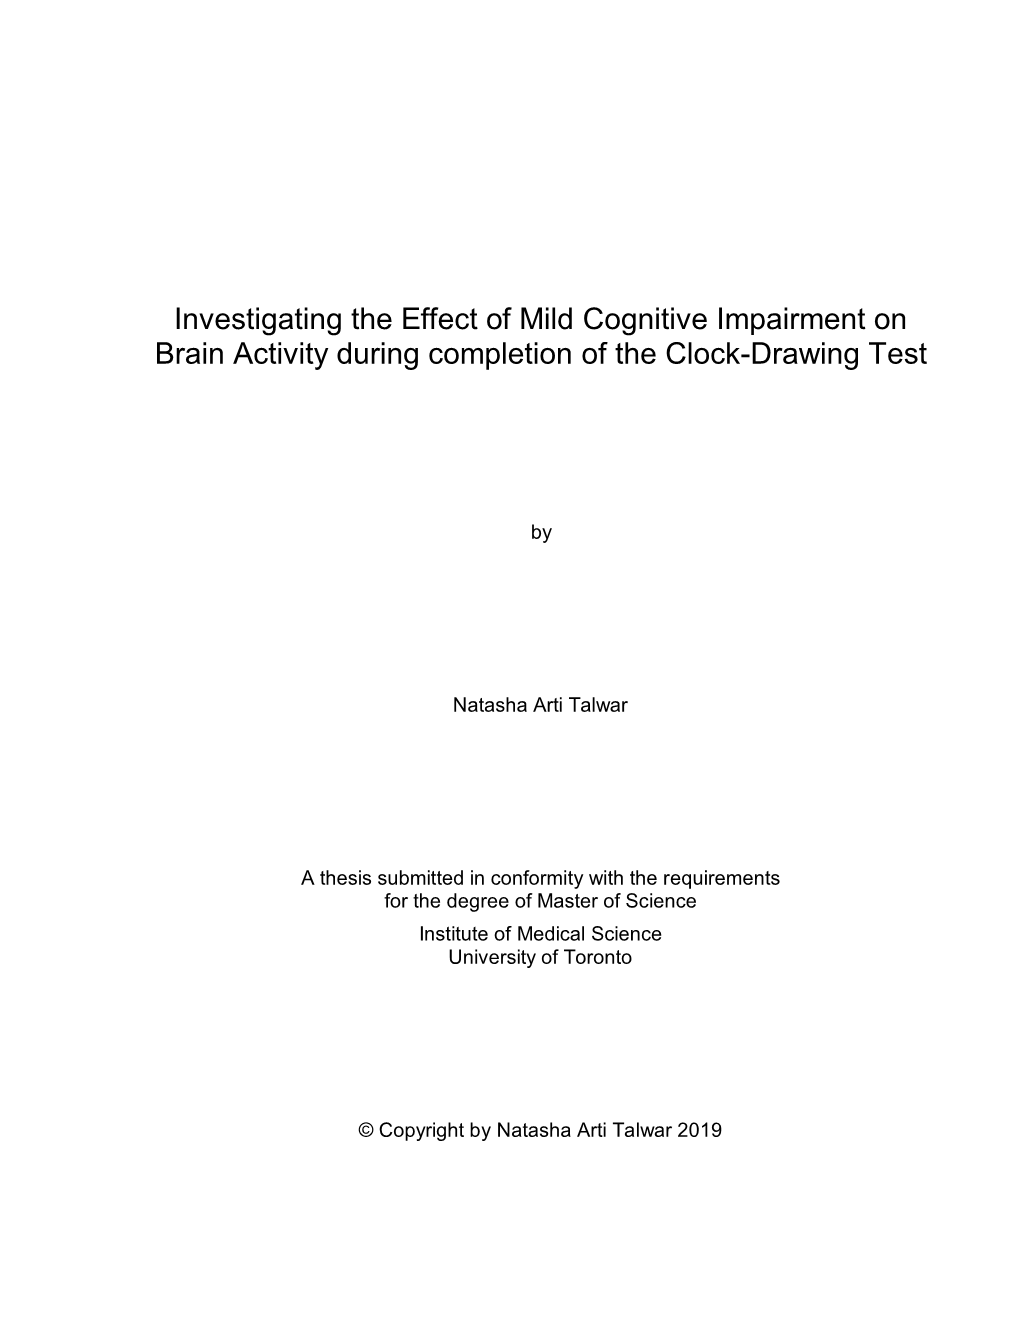 Investigating the Effect of Mild Cognitive Impairment on Brain Activity During Completion of the Clock-Drawing Test